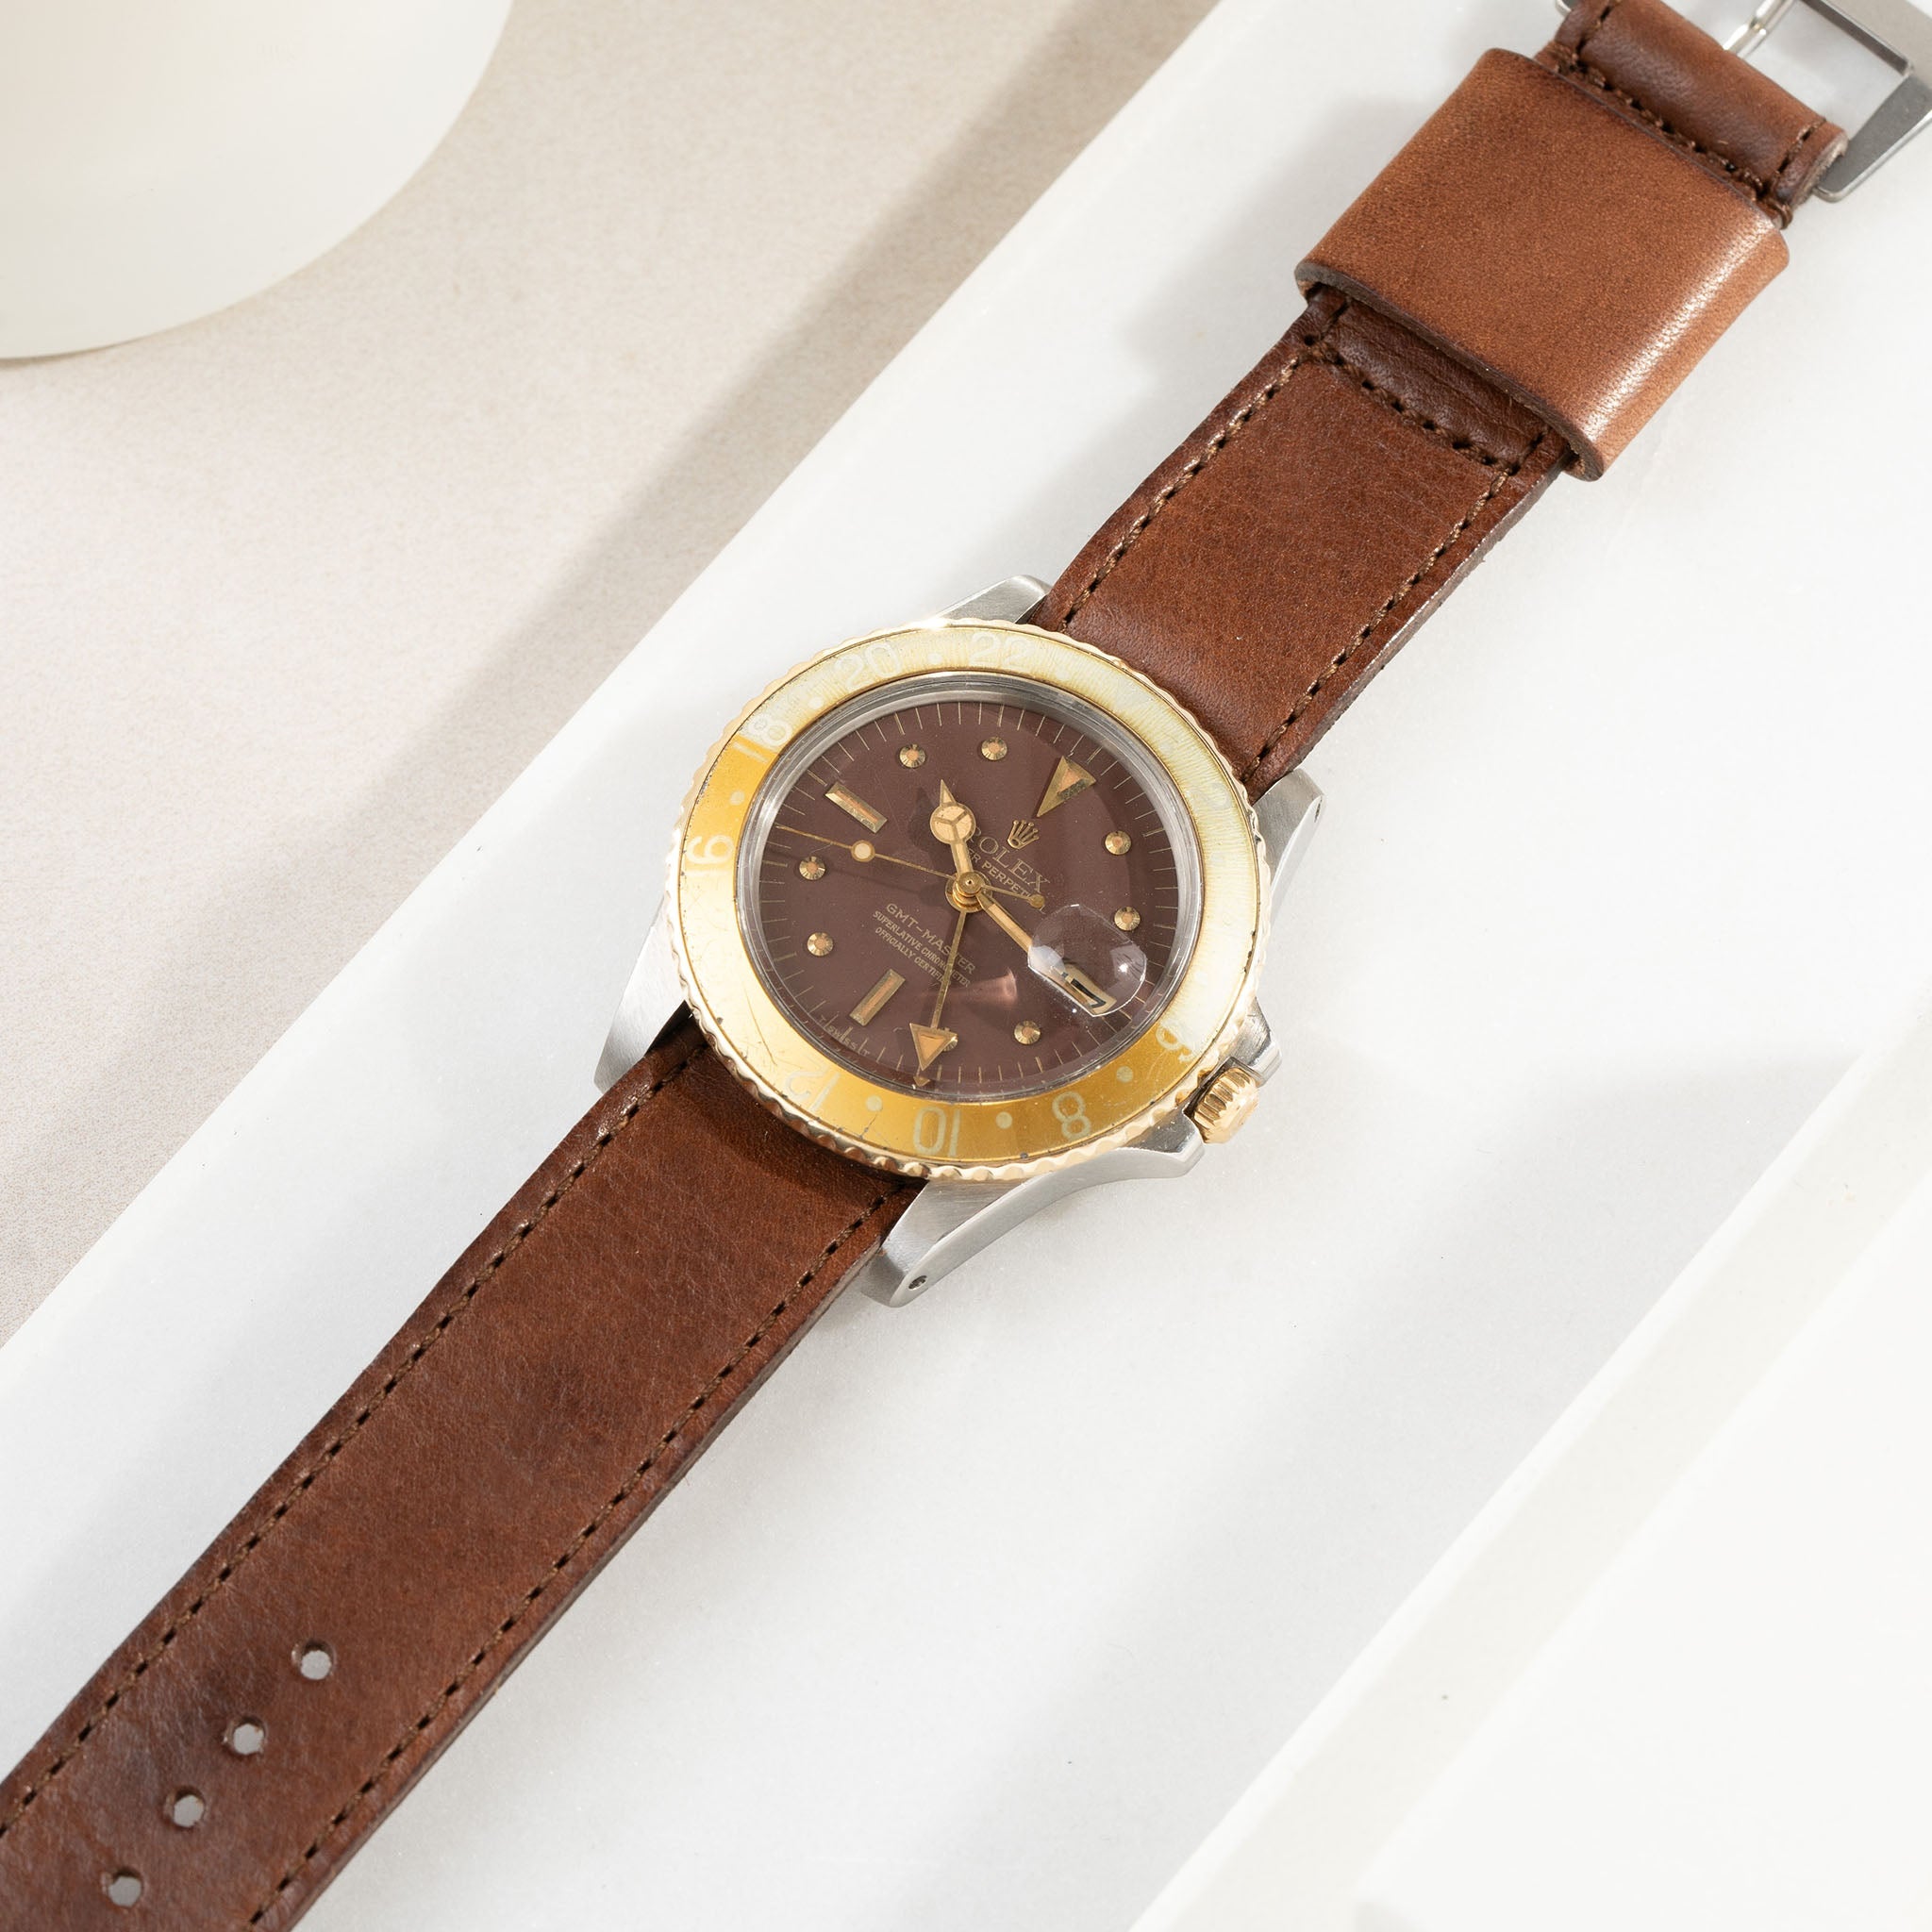 Italian_One_Piece_Nato_Brown_Leather_Watch_Strap_For_Rolex_GMT_1675_Brown_nipple